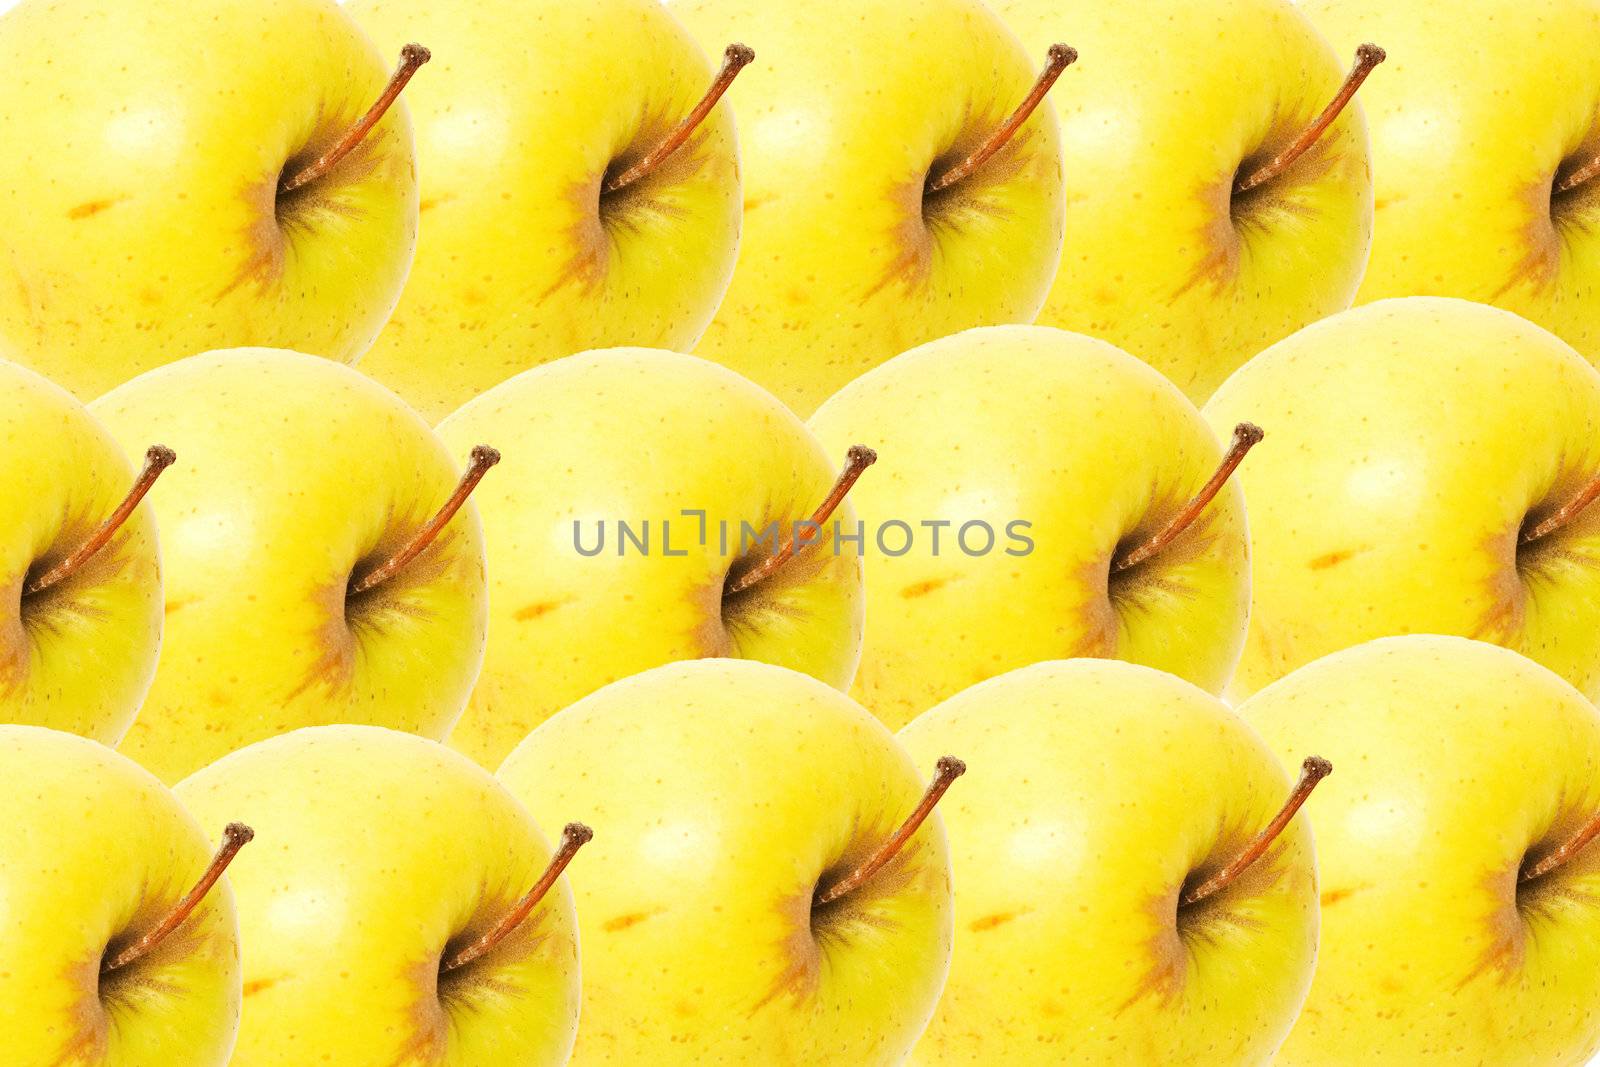 Yellow apples as a background by schankz